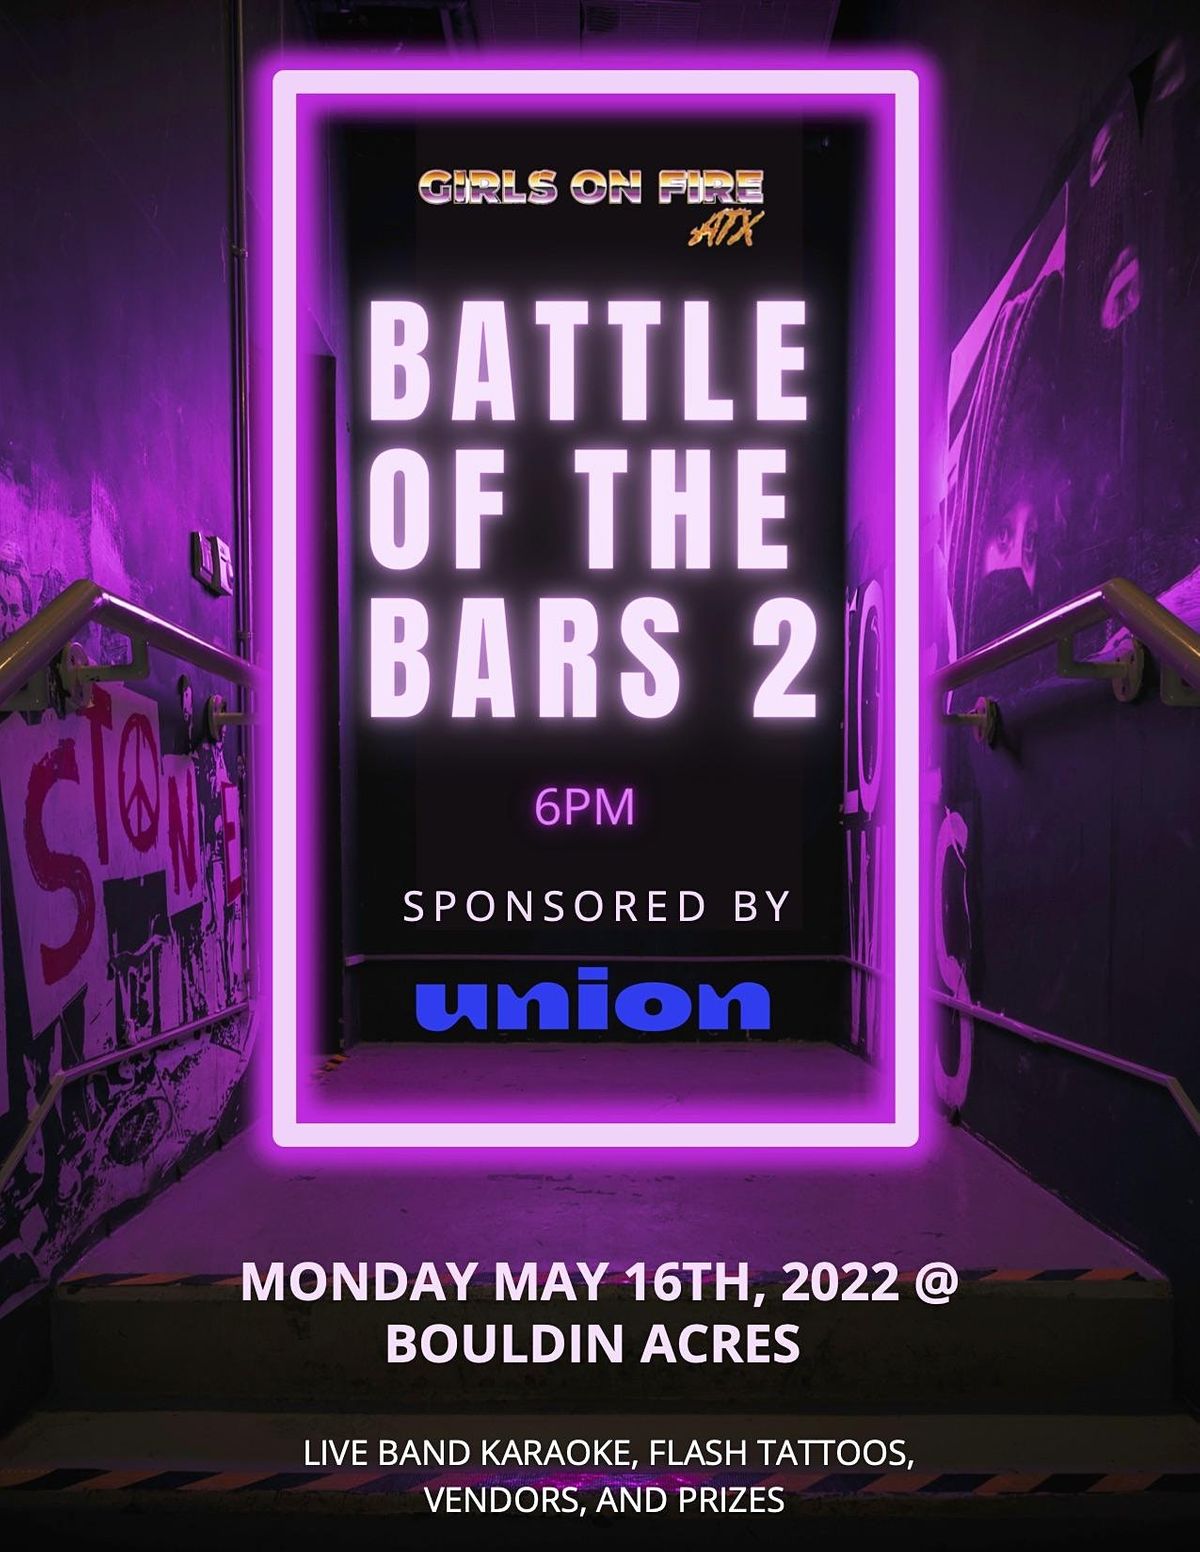 BATTLE OF THE BARS 2